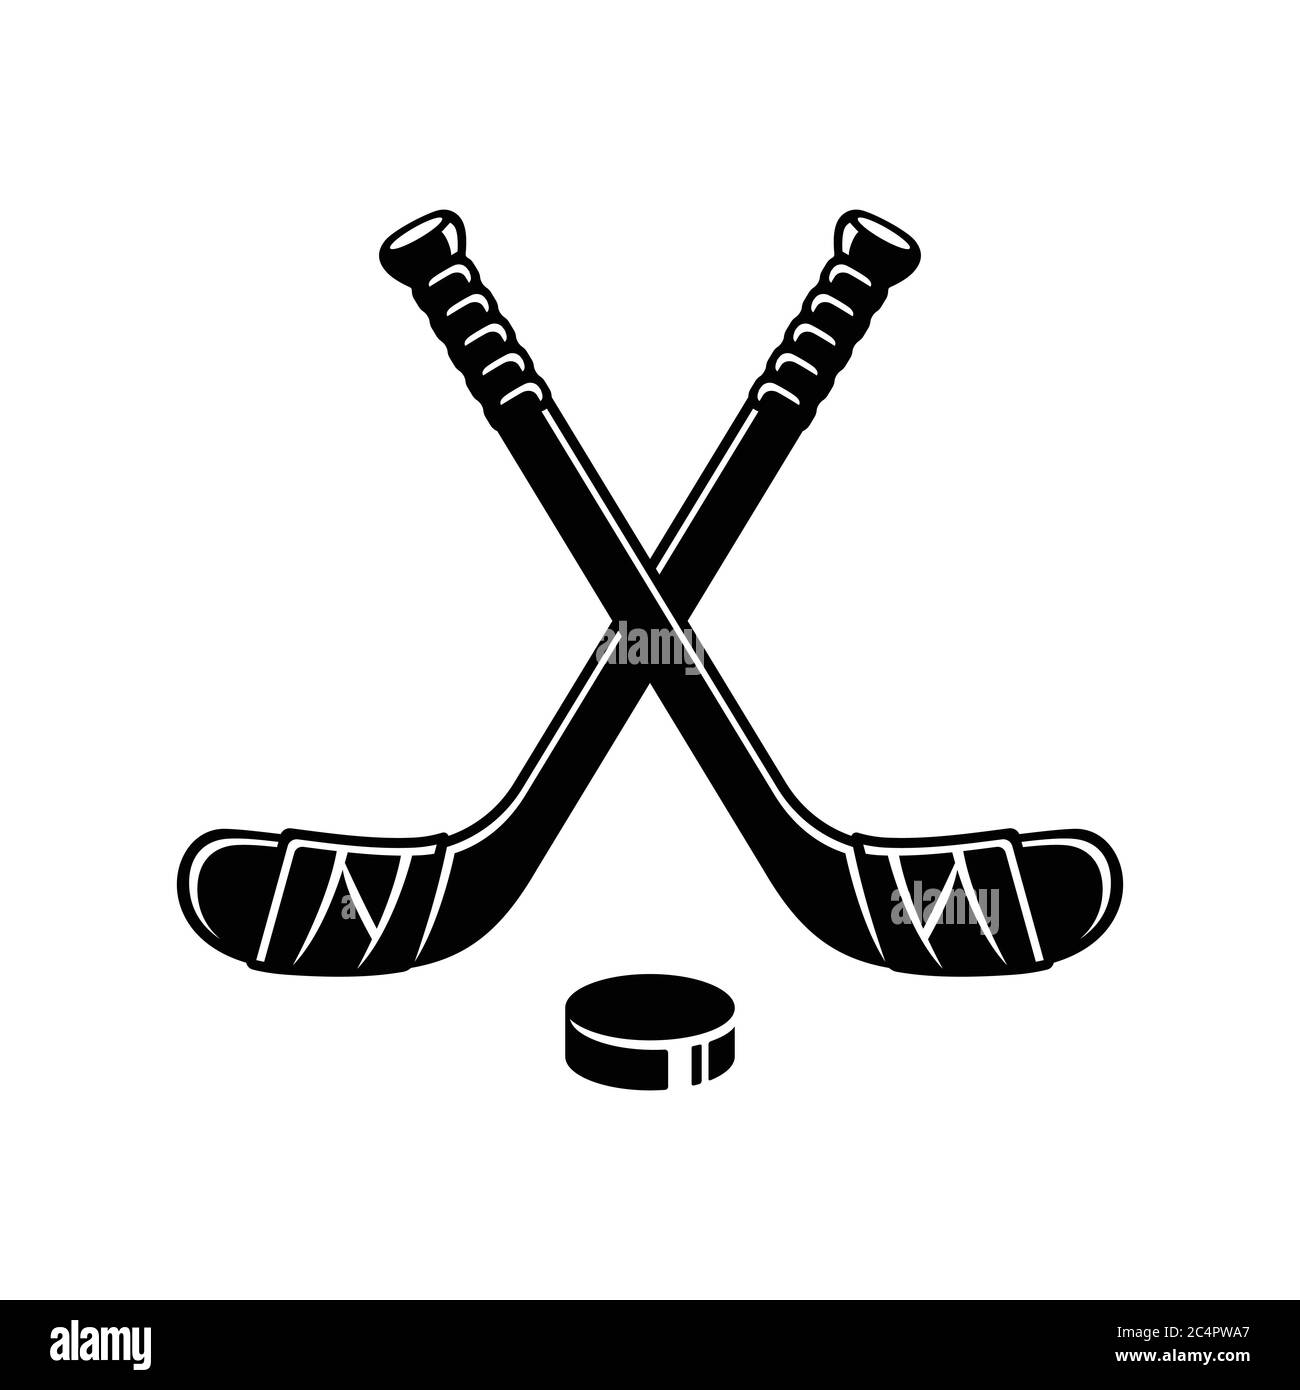 1,803 Hockey Puck Sketch Images, Stock Photos, 3D objects, & Vectors